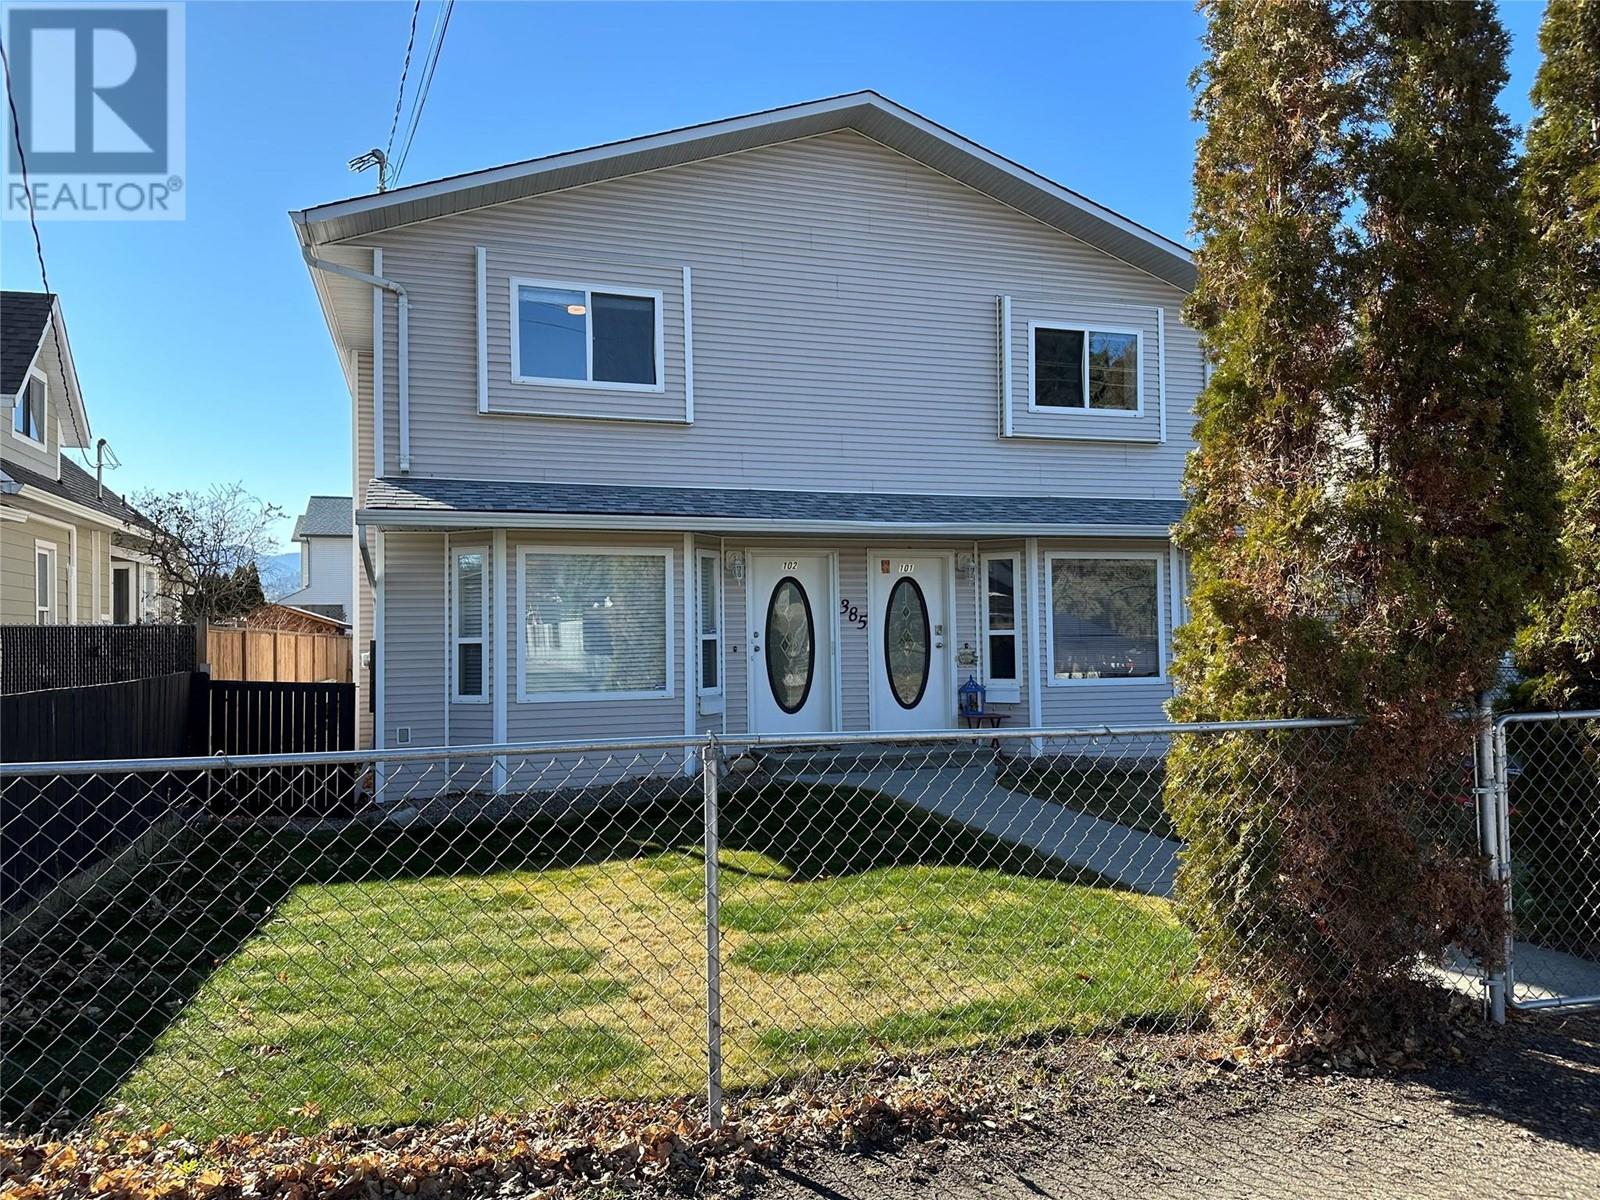 385 Rigsby Street 102, Main North, Penticton 